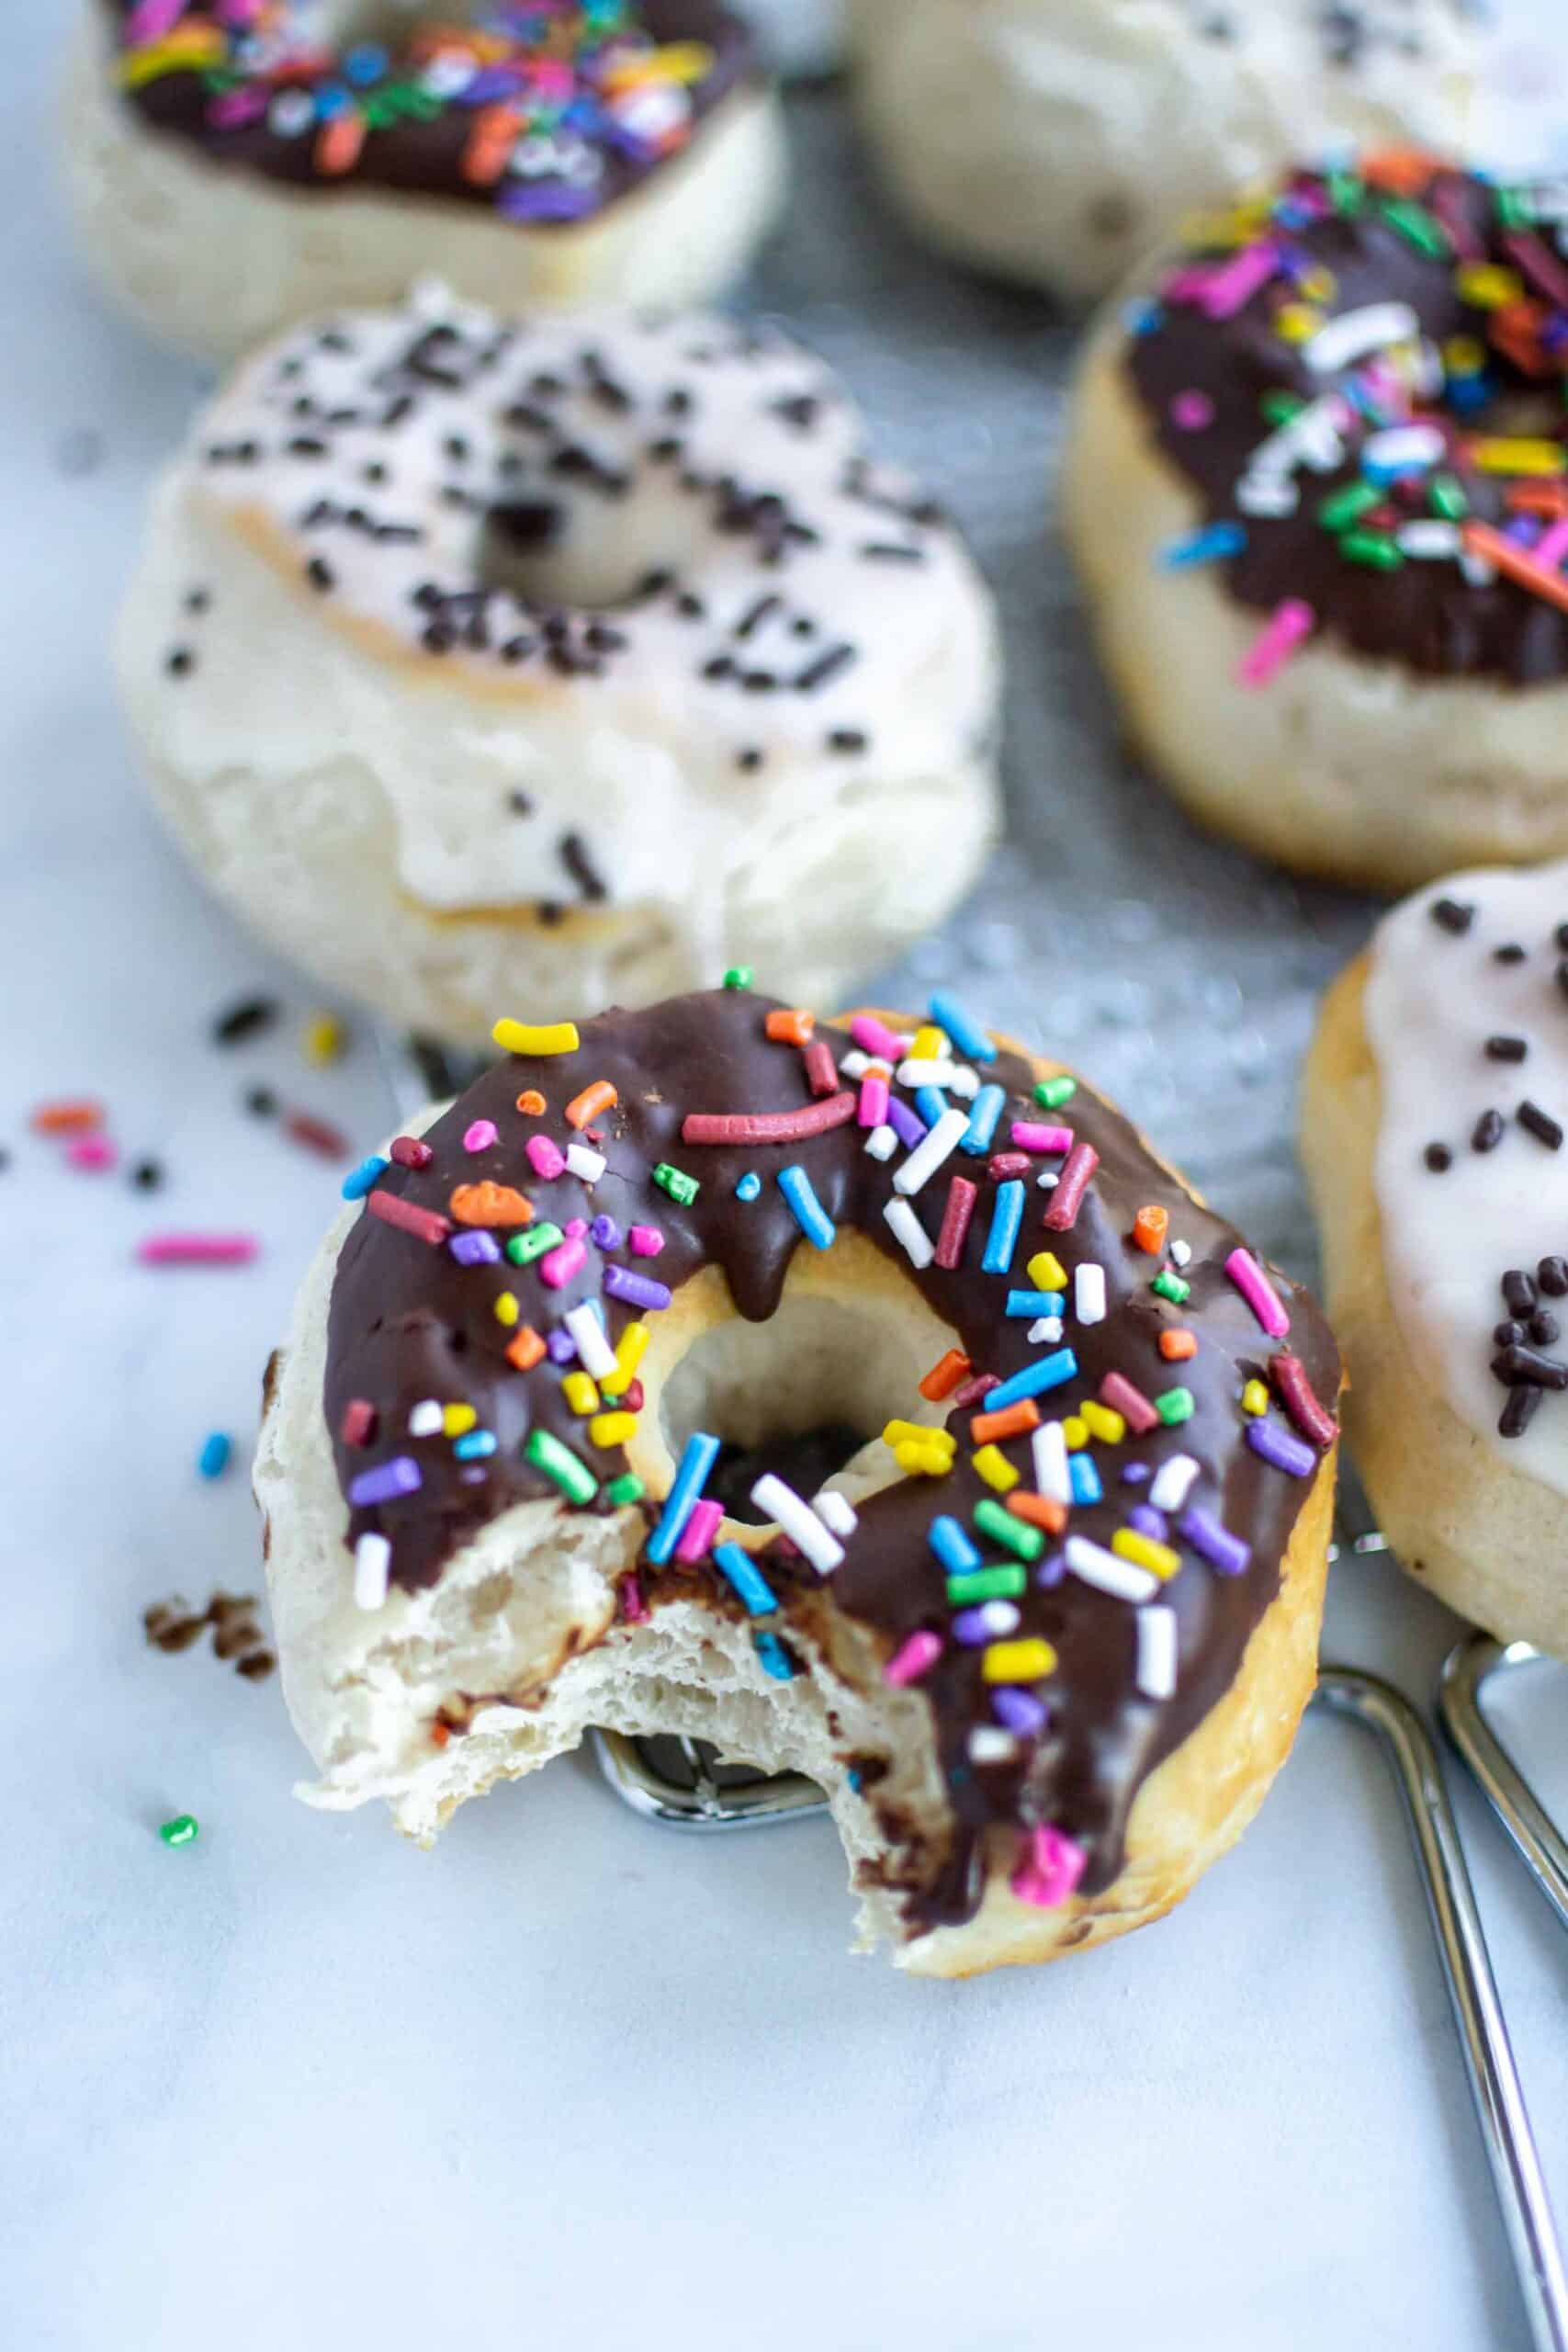 Chocolate and vanilla glazed air fryer biscuit doughnuts with sprinkles and chocolate doughnut with a bite taken.